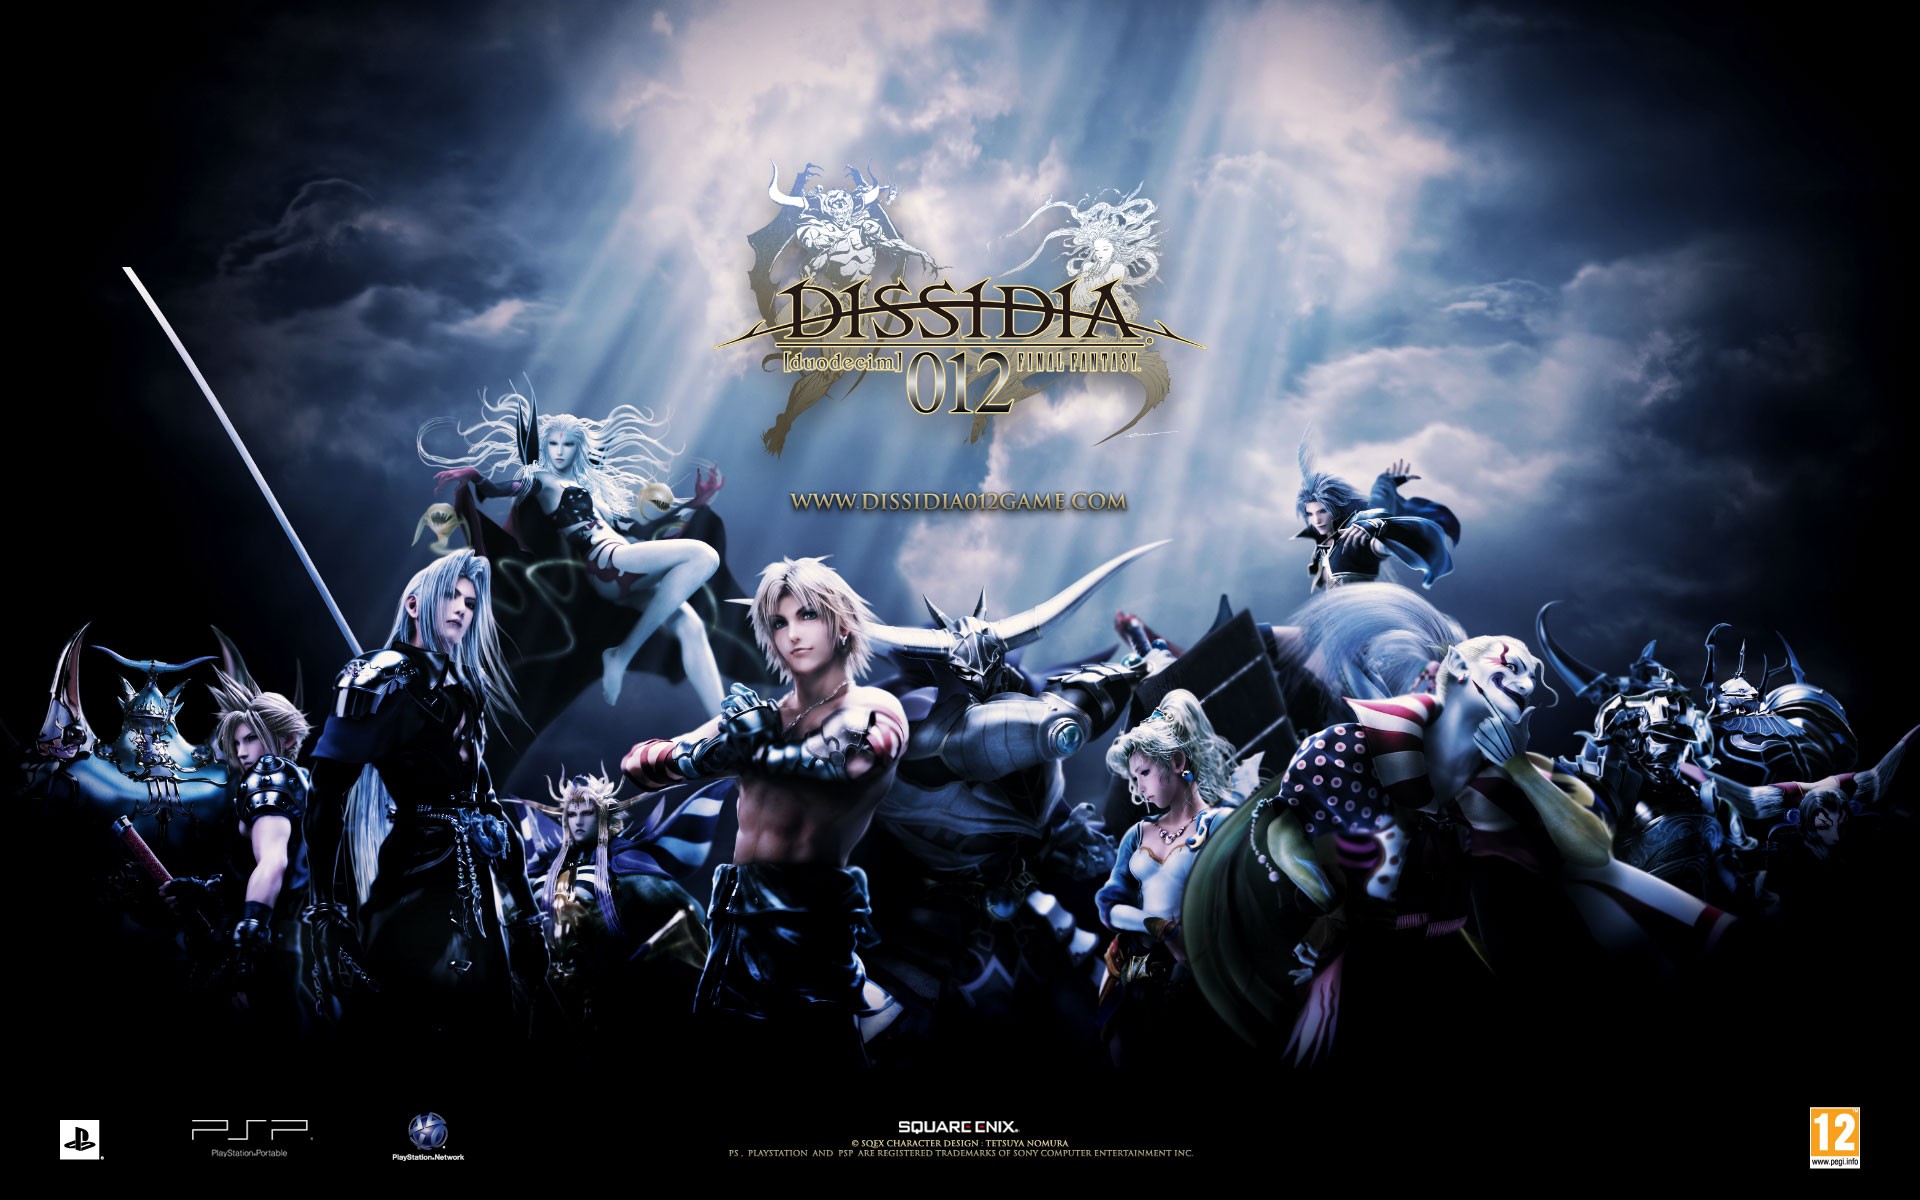 Free Download Dissidia Final Fantasy Wallpapers Dissidia Final Fantasy Stock 19x10 For Your Desktop Mobile Tablet Explore 65 Final Fantasy Dissidia Wallpaper Final Fantasy Dissidia Wallpaper Final Fantasy Backgrounds